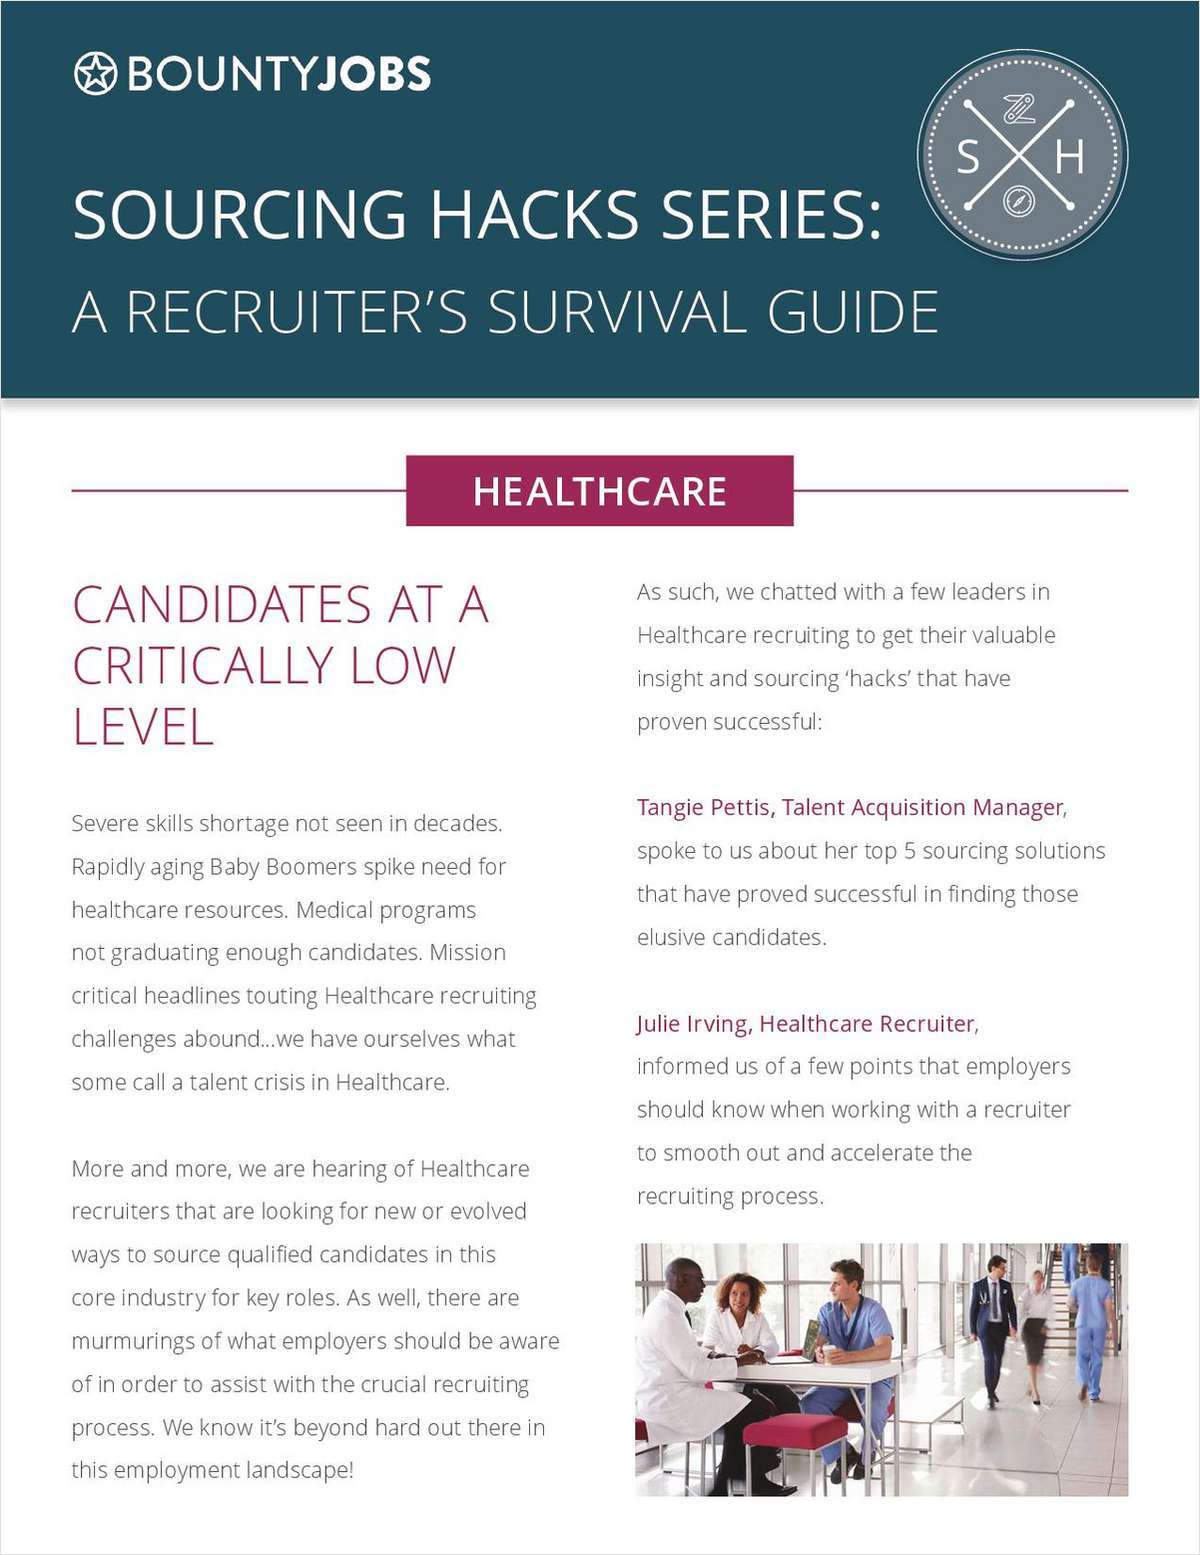 Sourcing Hacks Series: A Recruiter's Survival Guide